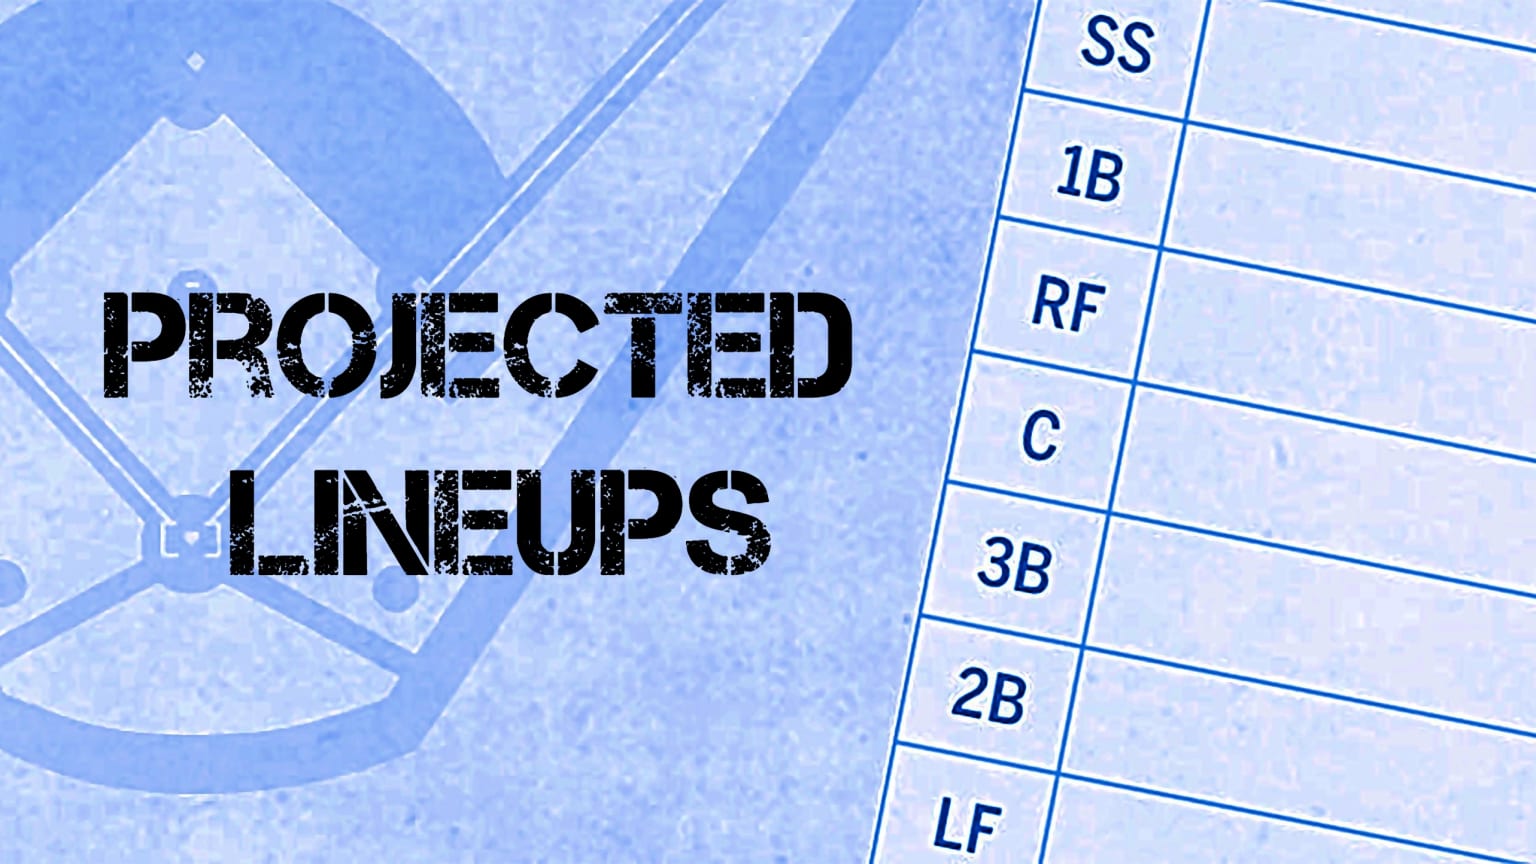 Line up MLB. Lineups. Line up. Project every